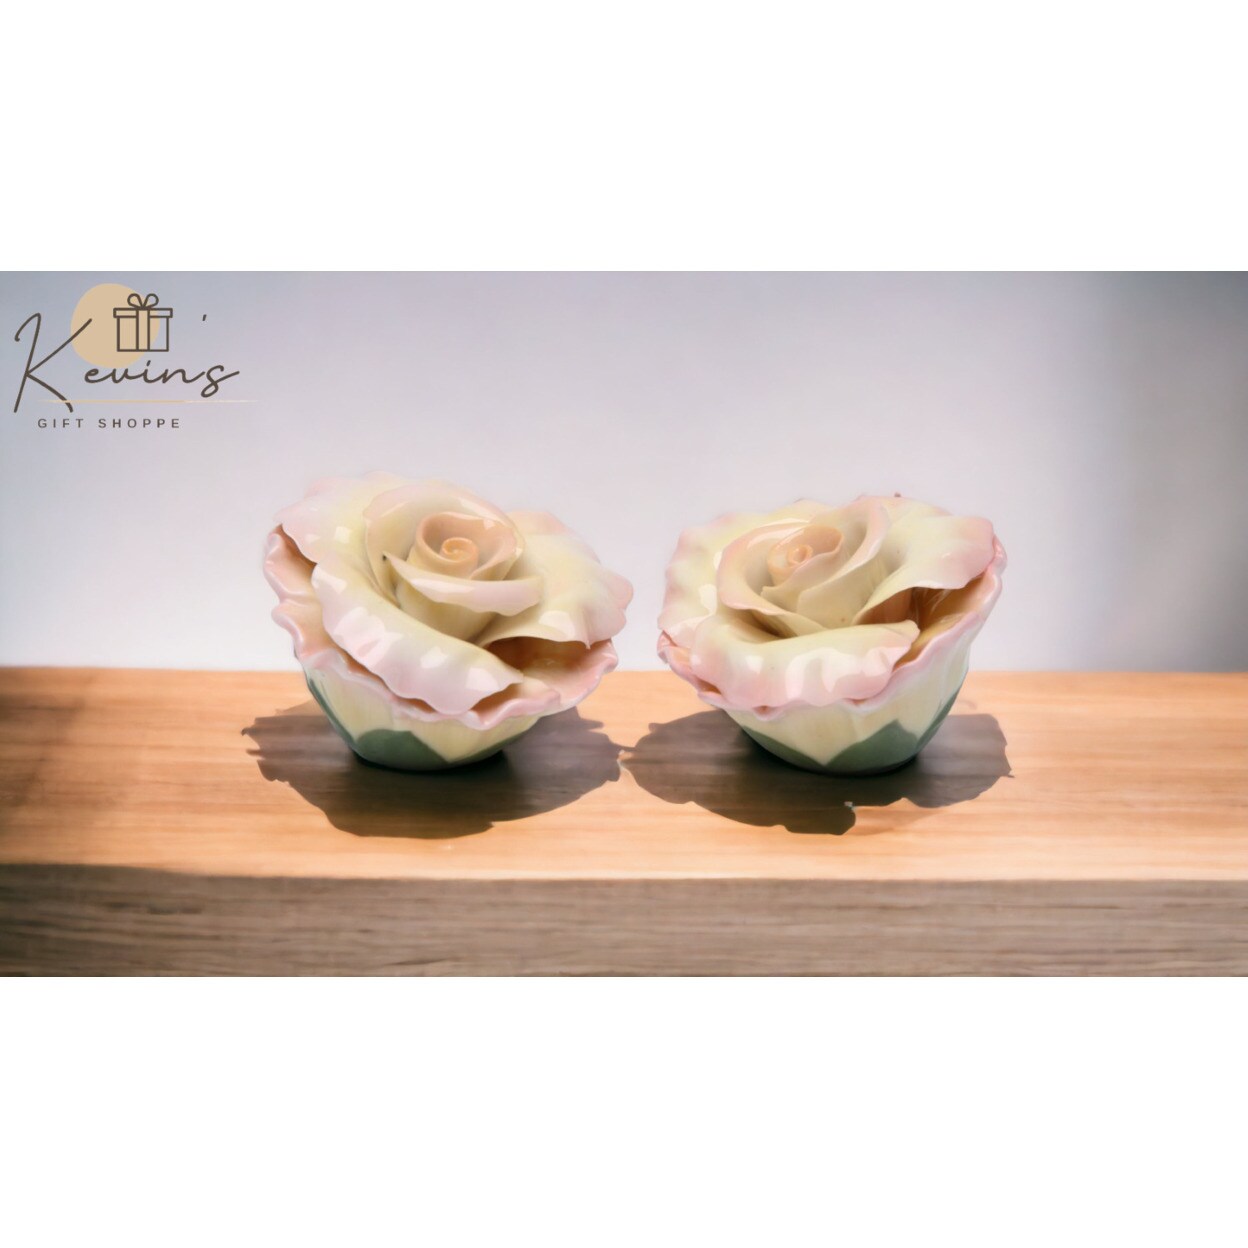 kevinsgiftshoppe Hand Crafted Ceramic Rose Flower Salt and Pepper Shakers Home Decor   Kitchen Decor